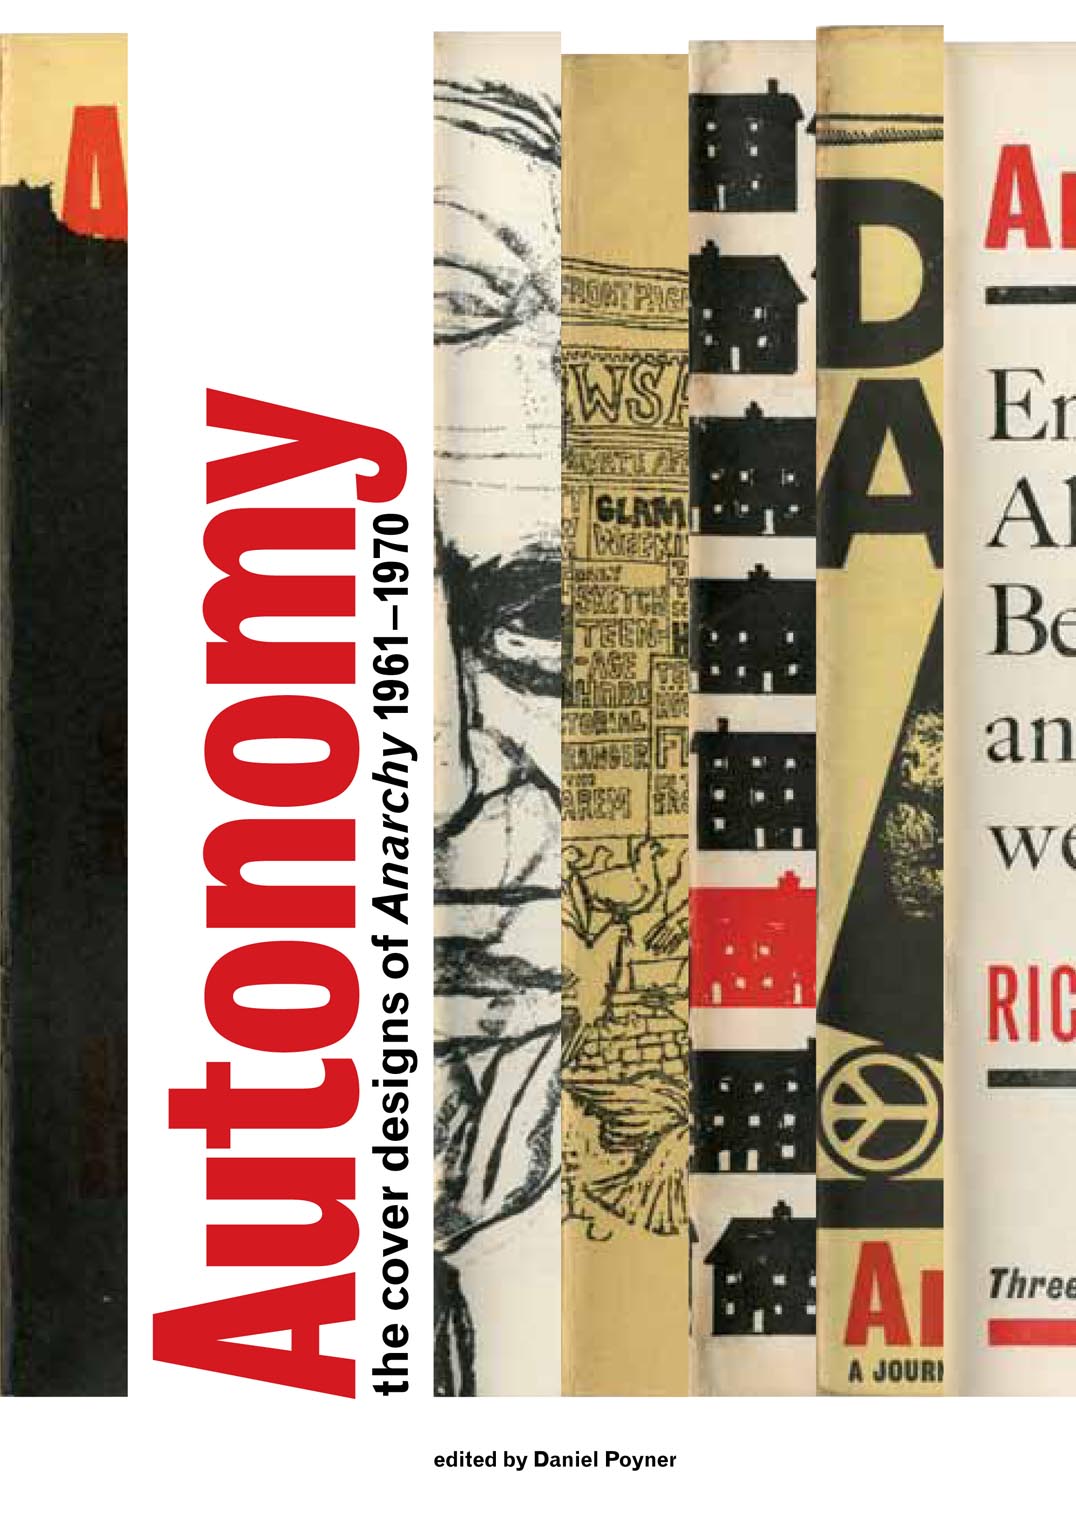 Autonomy: the cover designs of Anarchy, 1961–1970